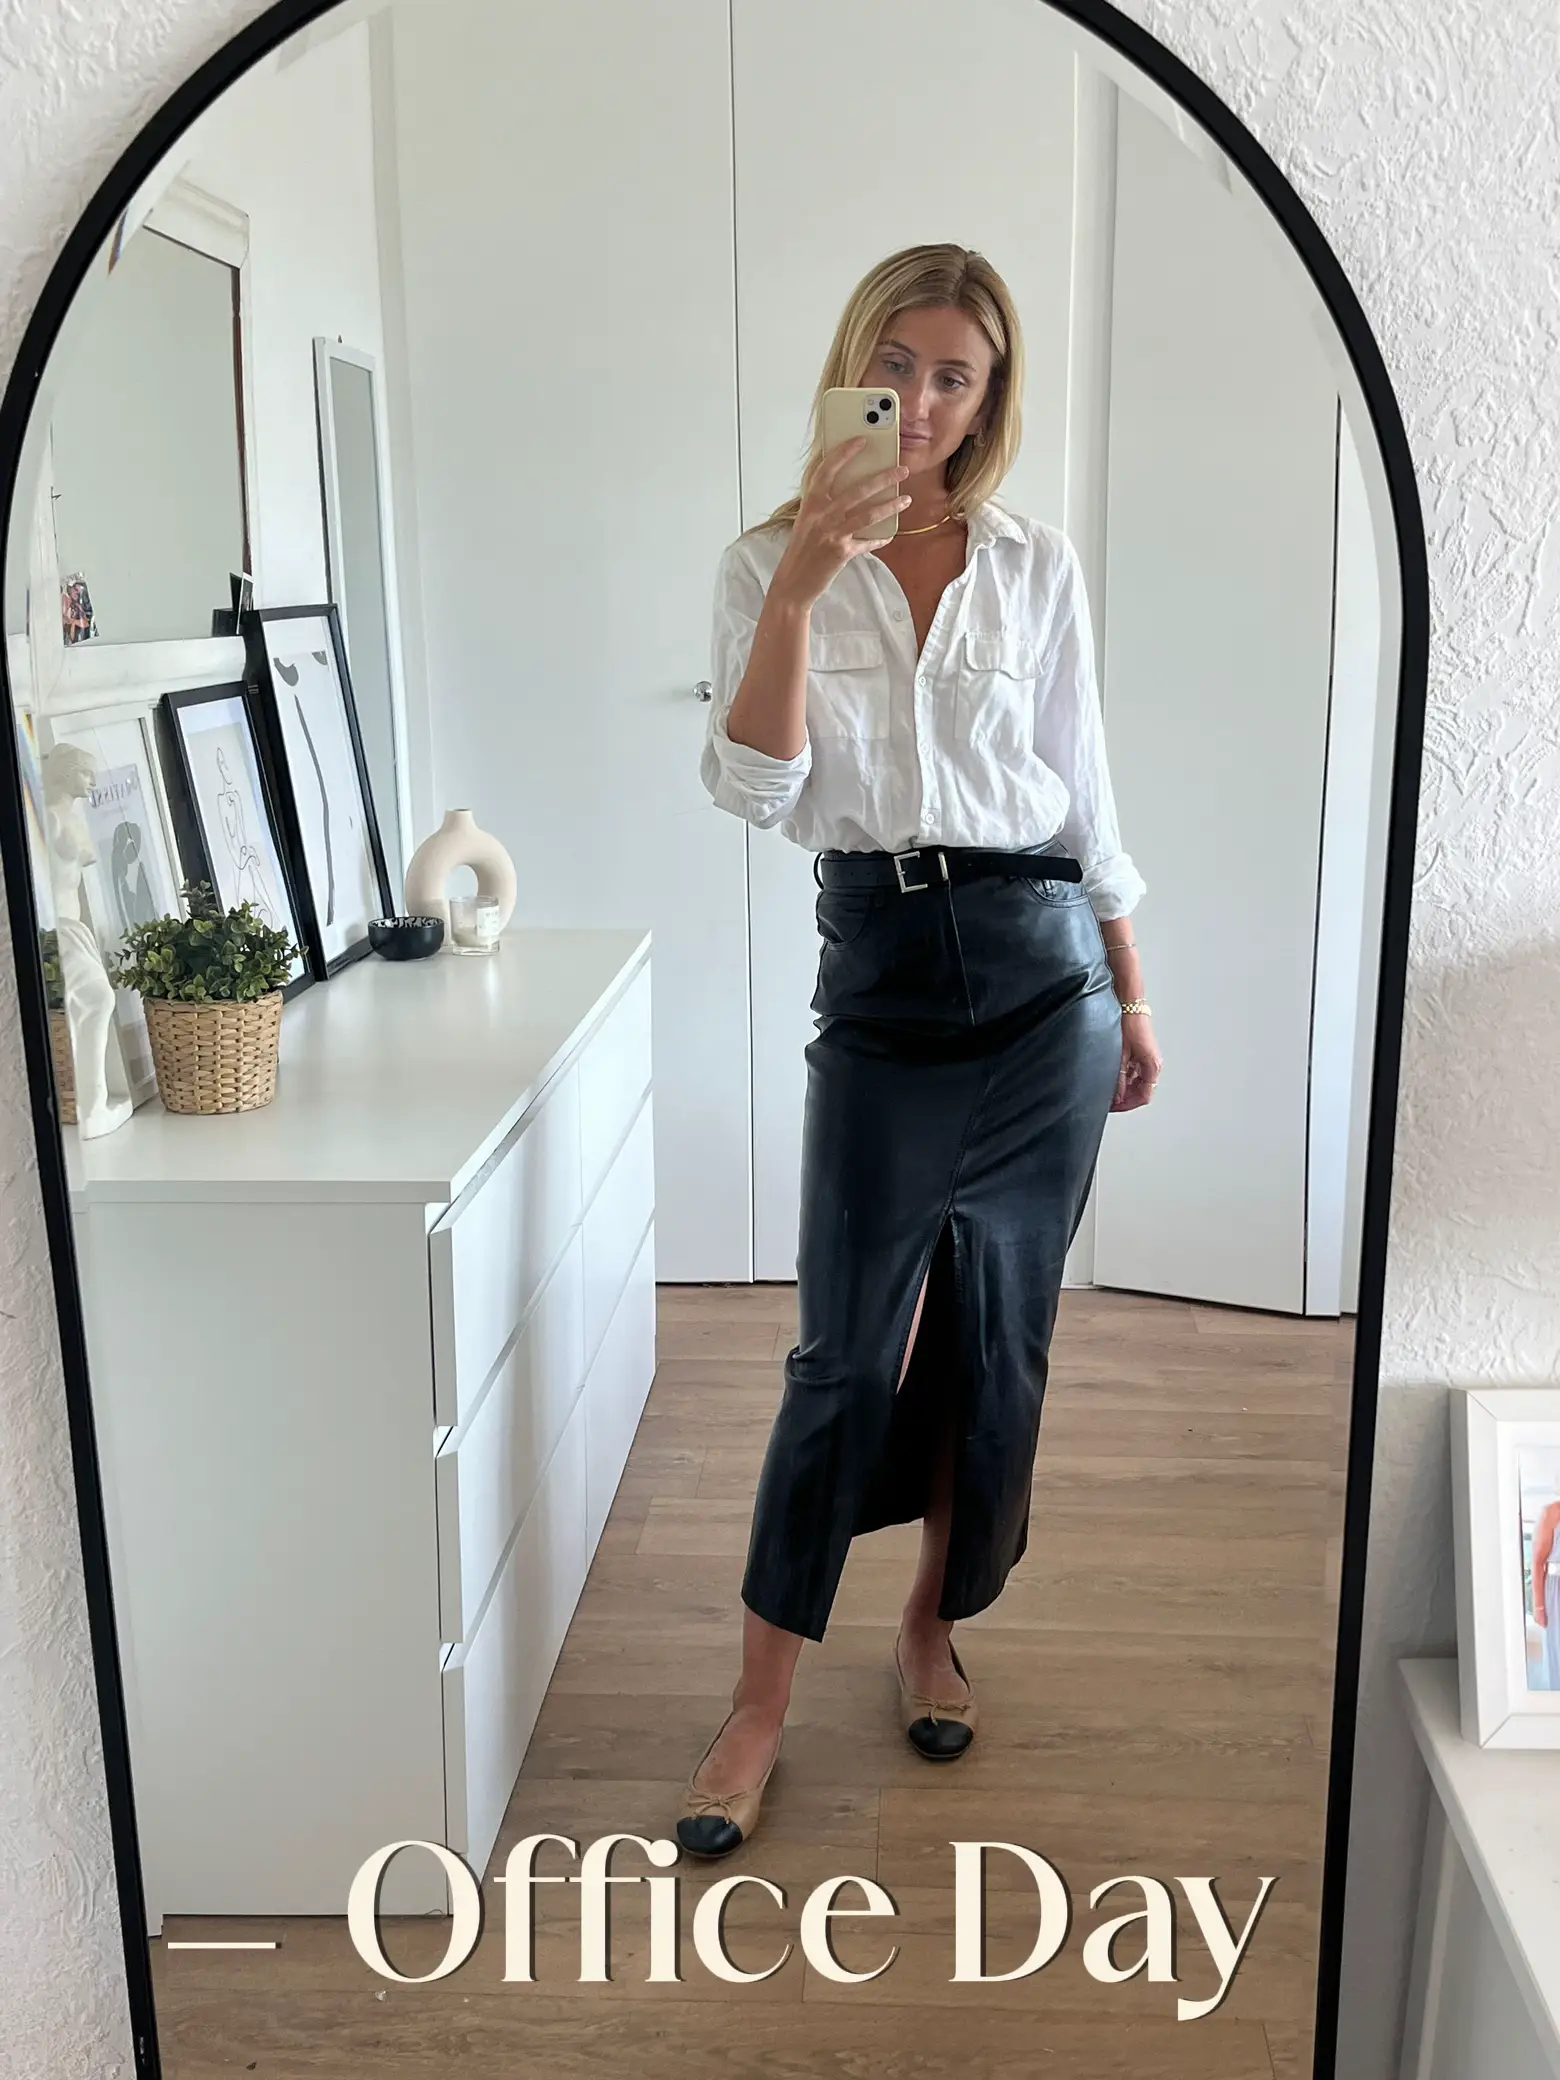 92 Amazing Leather Pencil Skirt Outfit Ideas To Wear In 2023  Leather  pencil skirt outfit, Leather skirt outfit, Pencil skirt outfits